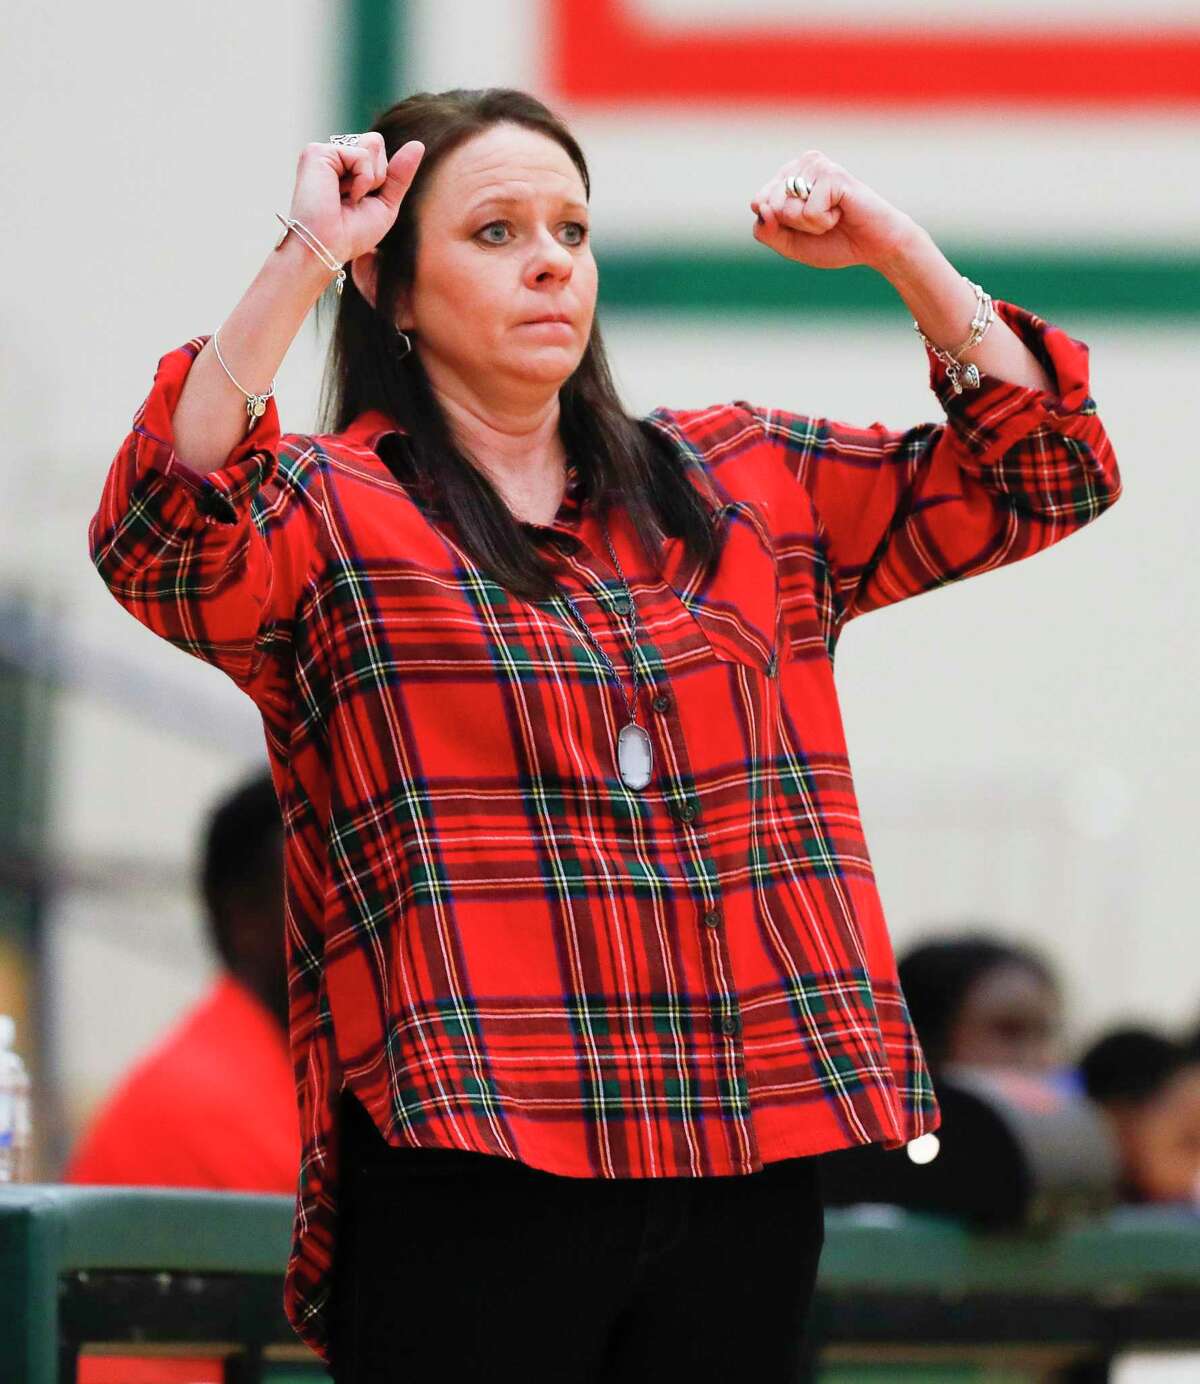 The Woodlands head coach Trista Tatsch reacts to a missed three-pointer during the third quarter of a District 15-6A high school basketball game at The Woodlands High School, Tuesday, Dec. 31, 2019, in The Woodlands.